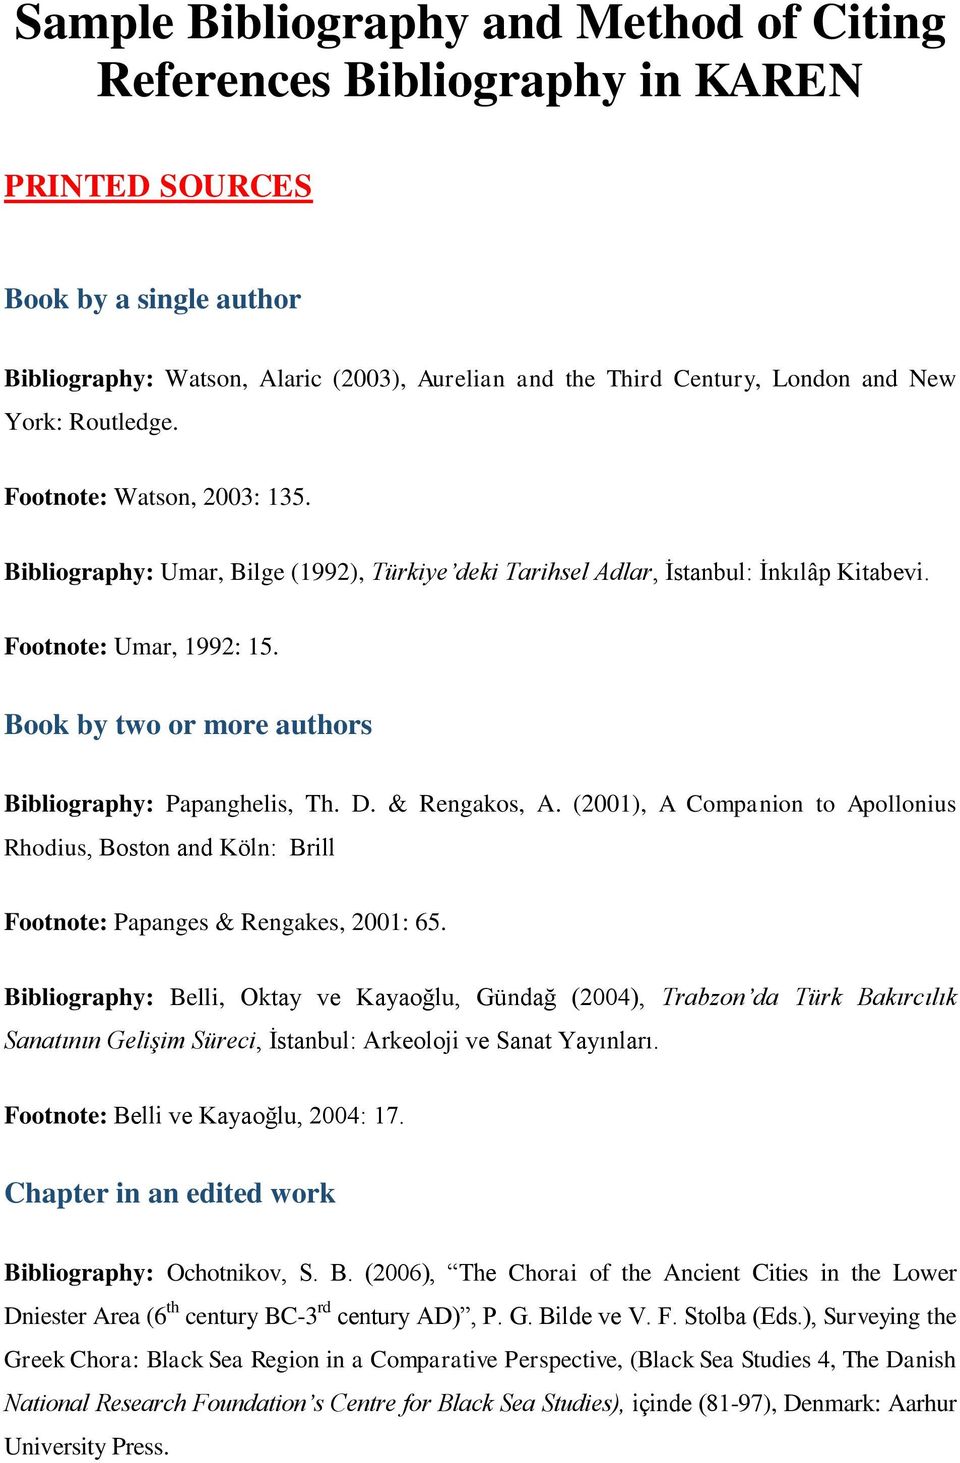 Book by two or more authors Bibliography: Papanghelis, Th. D. & Rengakos, A. (2001), A Companion to Apollonius Rhodius, Boston and Köln: Brill Footnote: Papanges & Rengakes, 2001: 65.